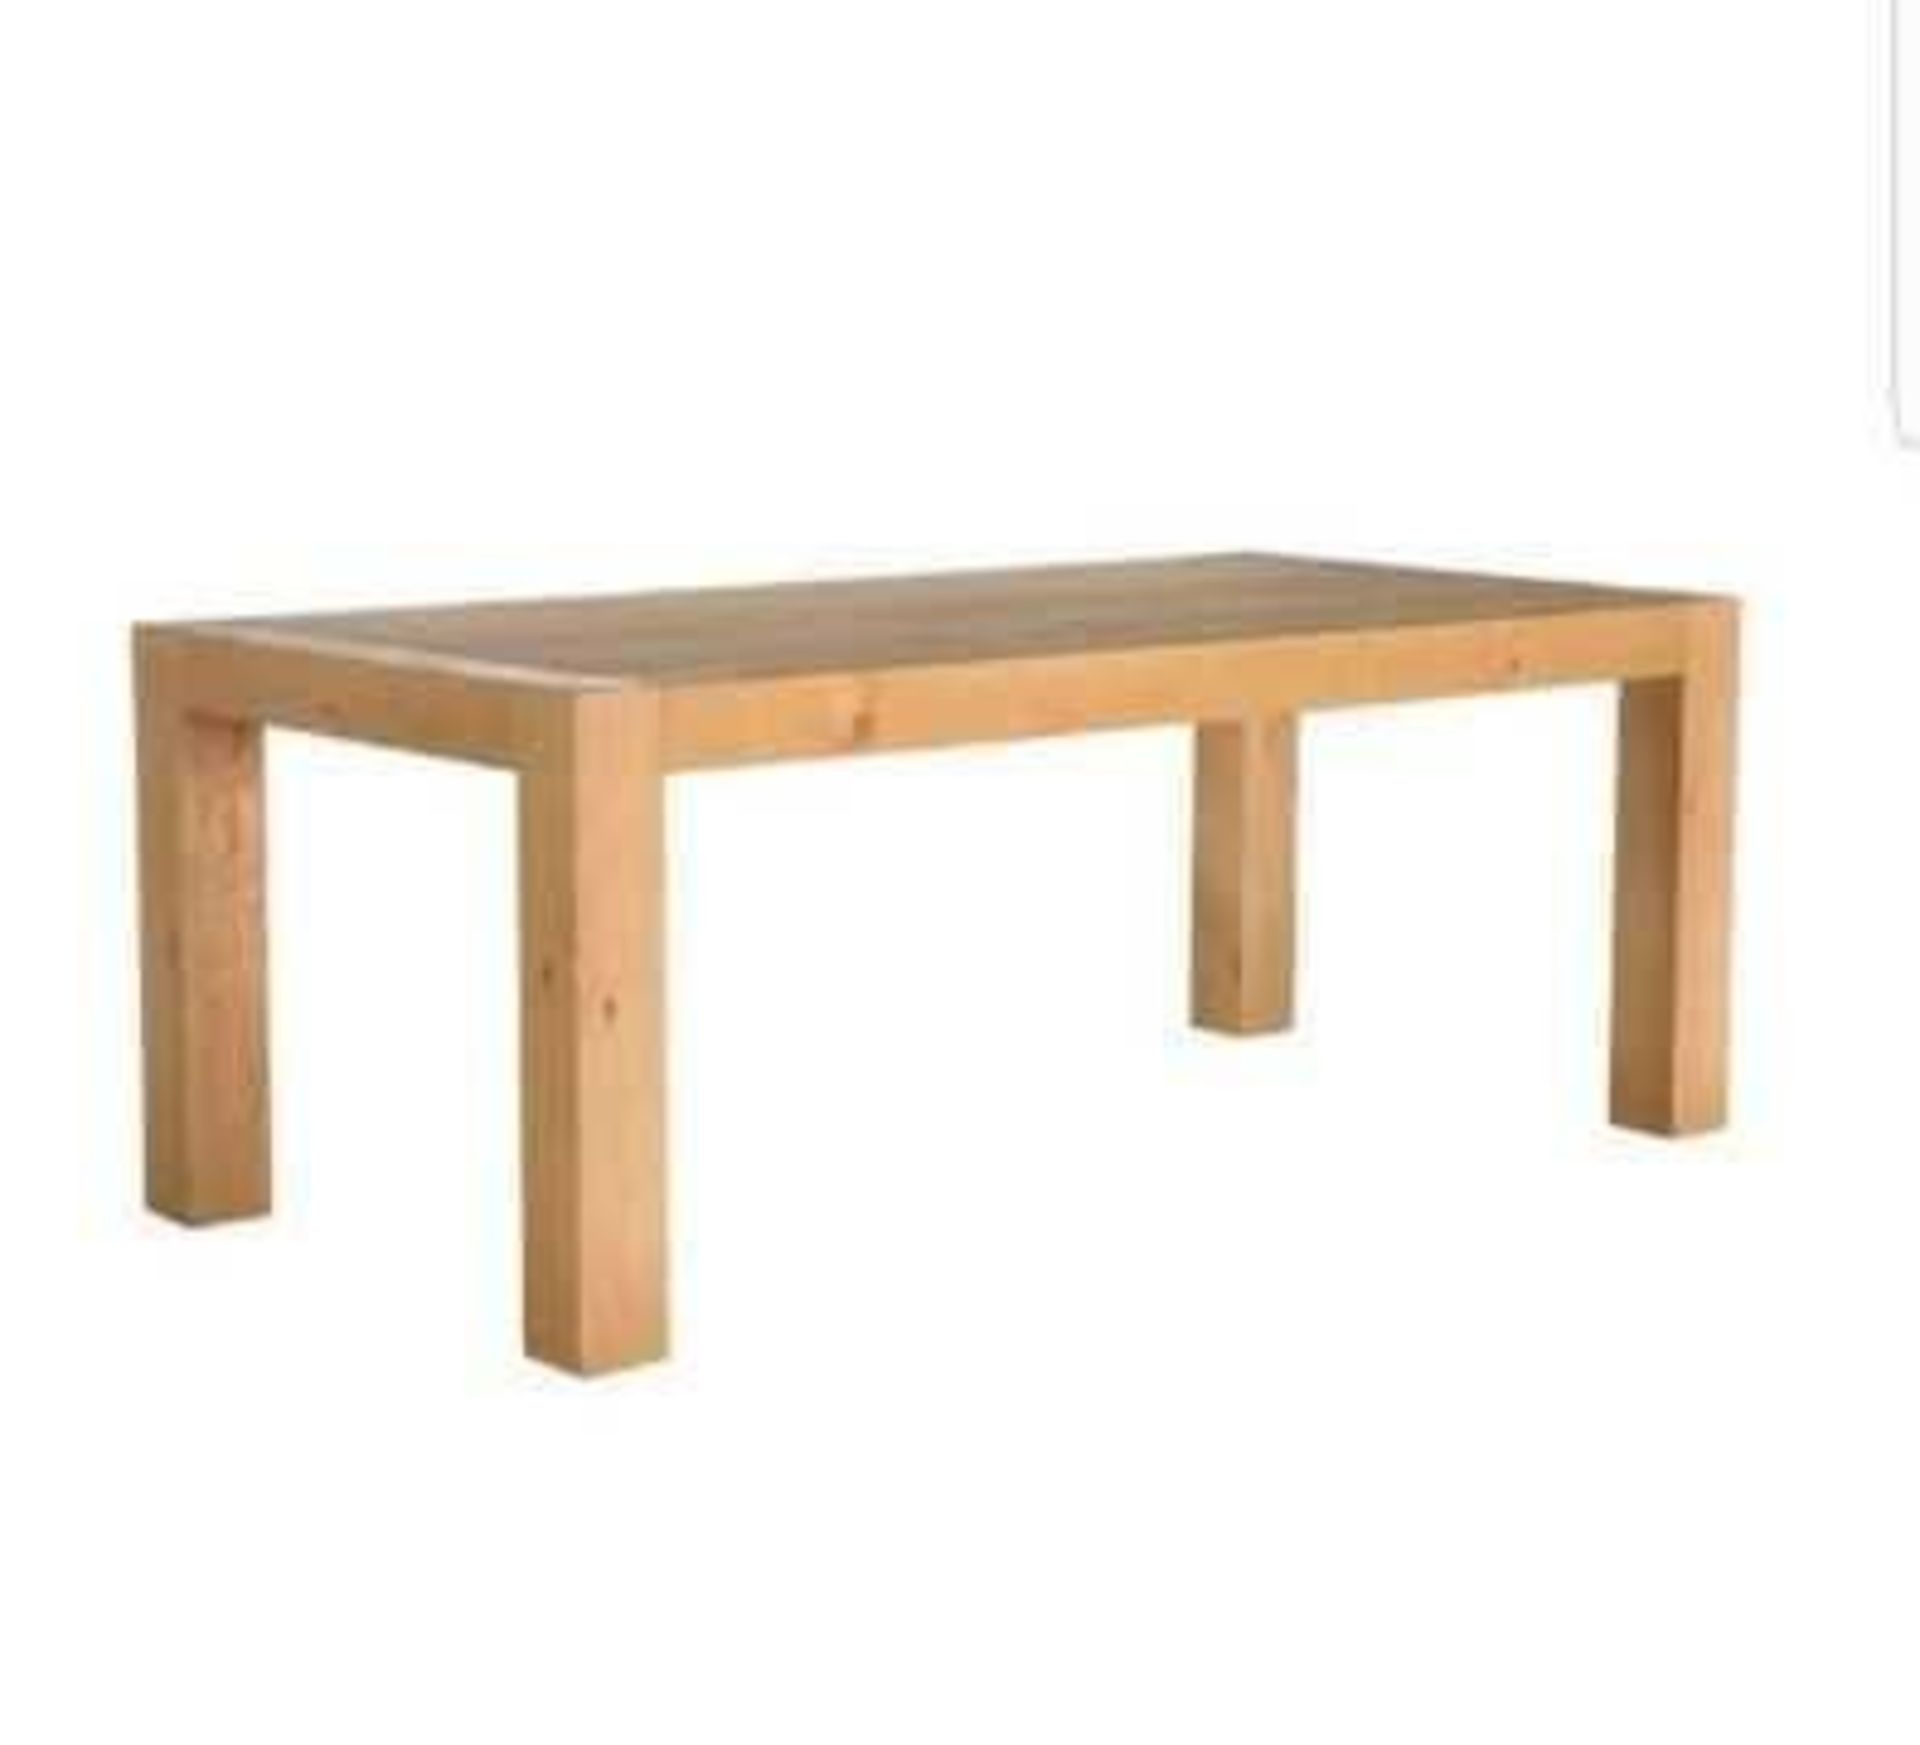 RRP £699, Sourced From Harveys, Lindos Large Oak Dining Table (Appraisals Available Upon Request) (